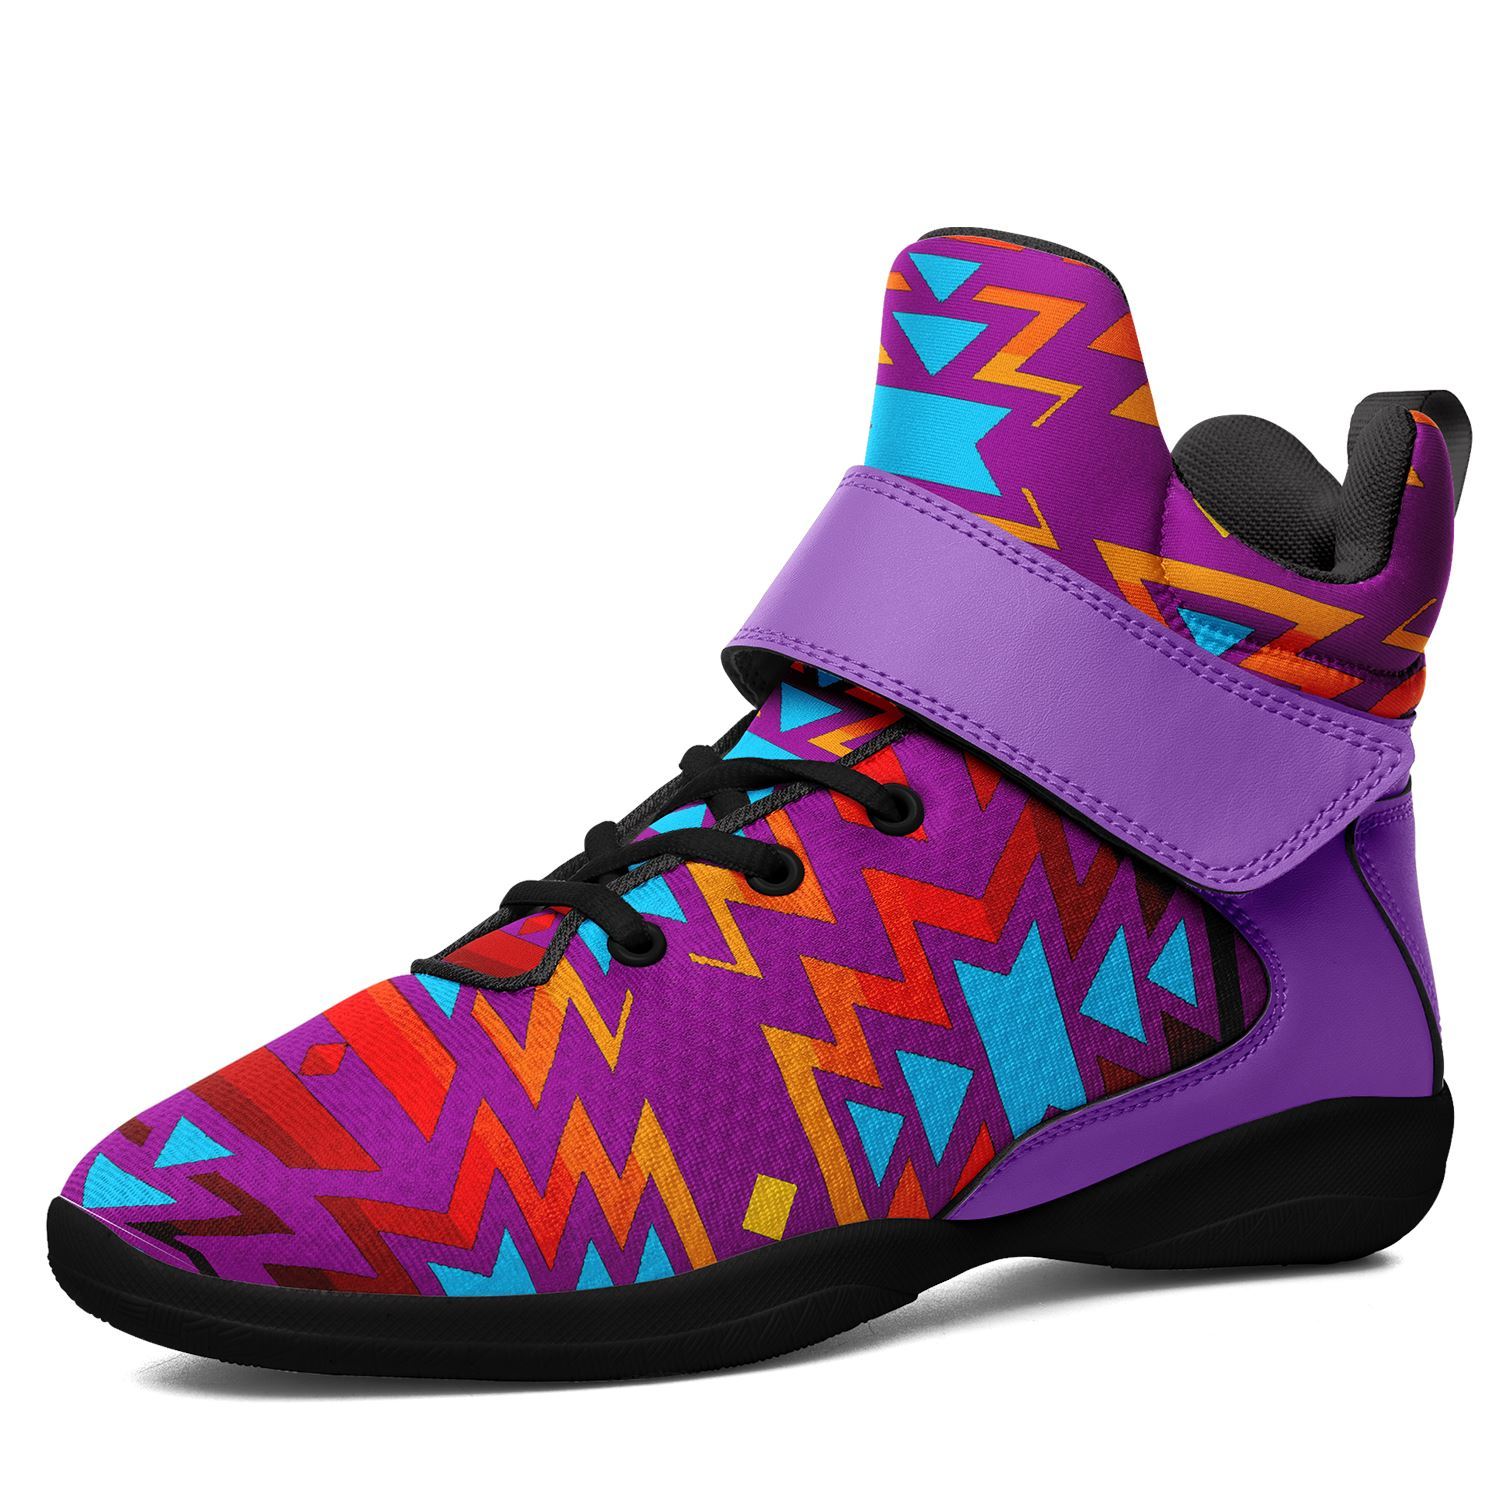 Fire Colors and Turquoise Purple Kid's Ipottaa Basketball / Sport High Top Shoes 49 Dzine 